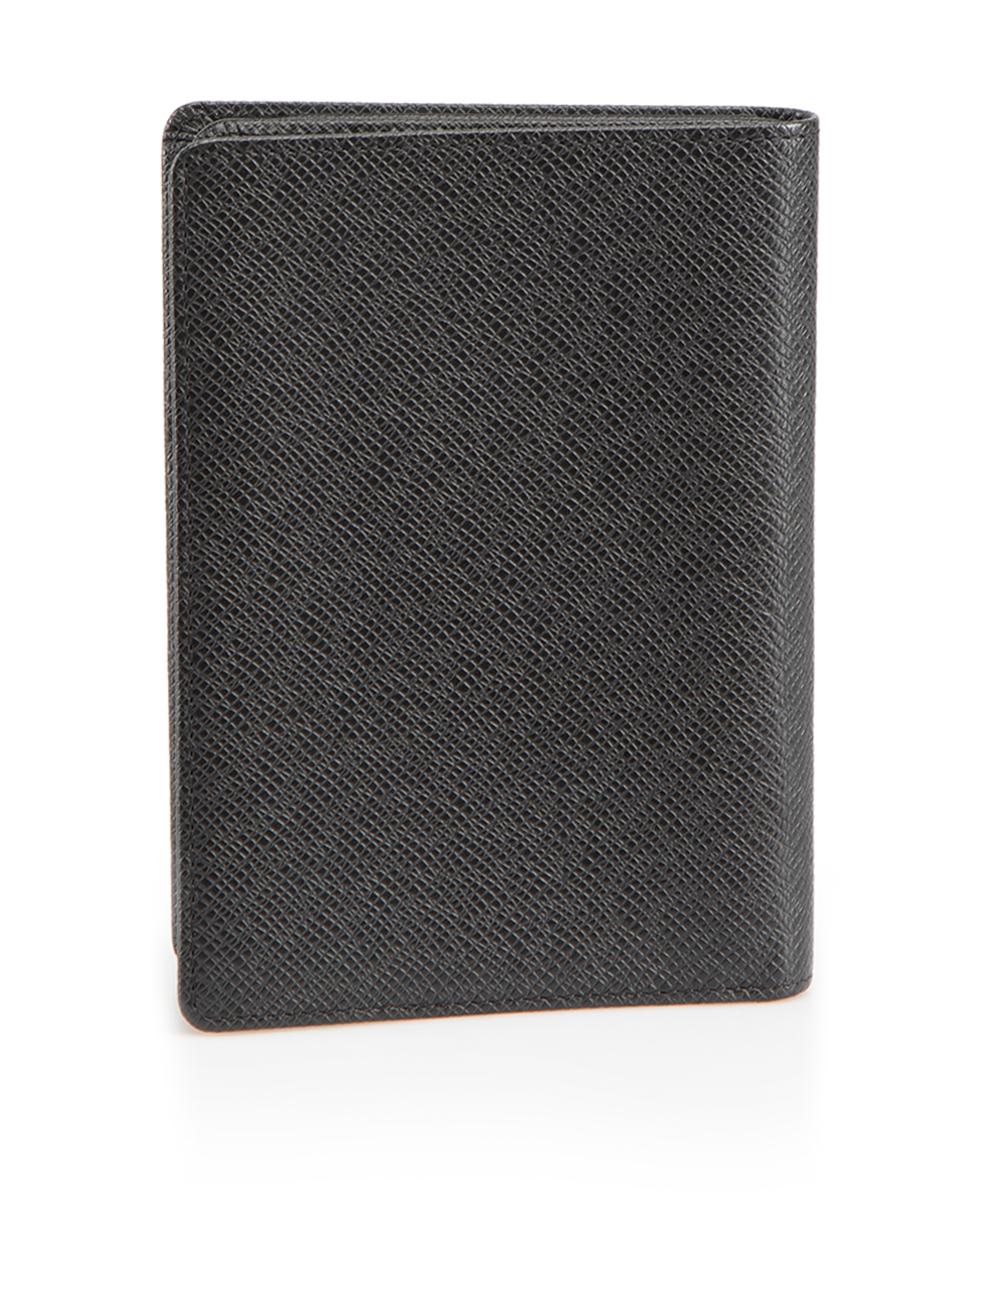 Louis Vuitton Black Leather Logo Passport Wallet In Excellent Condition For Sale In London, GB